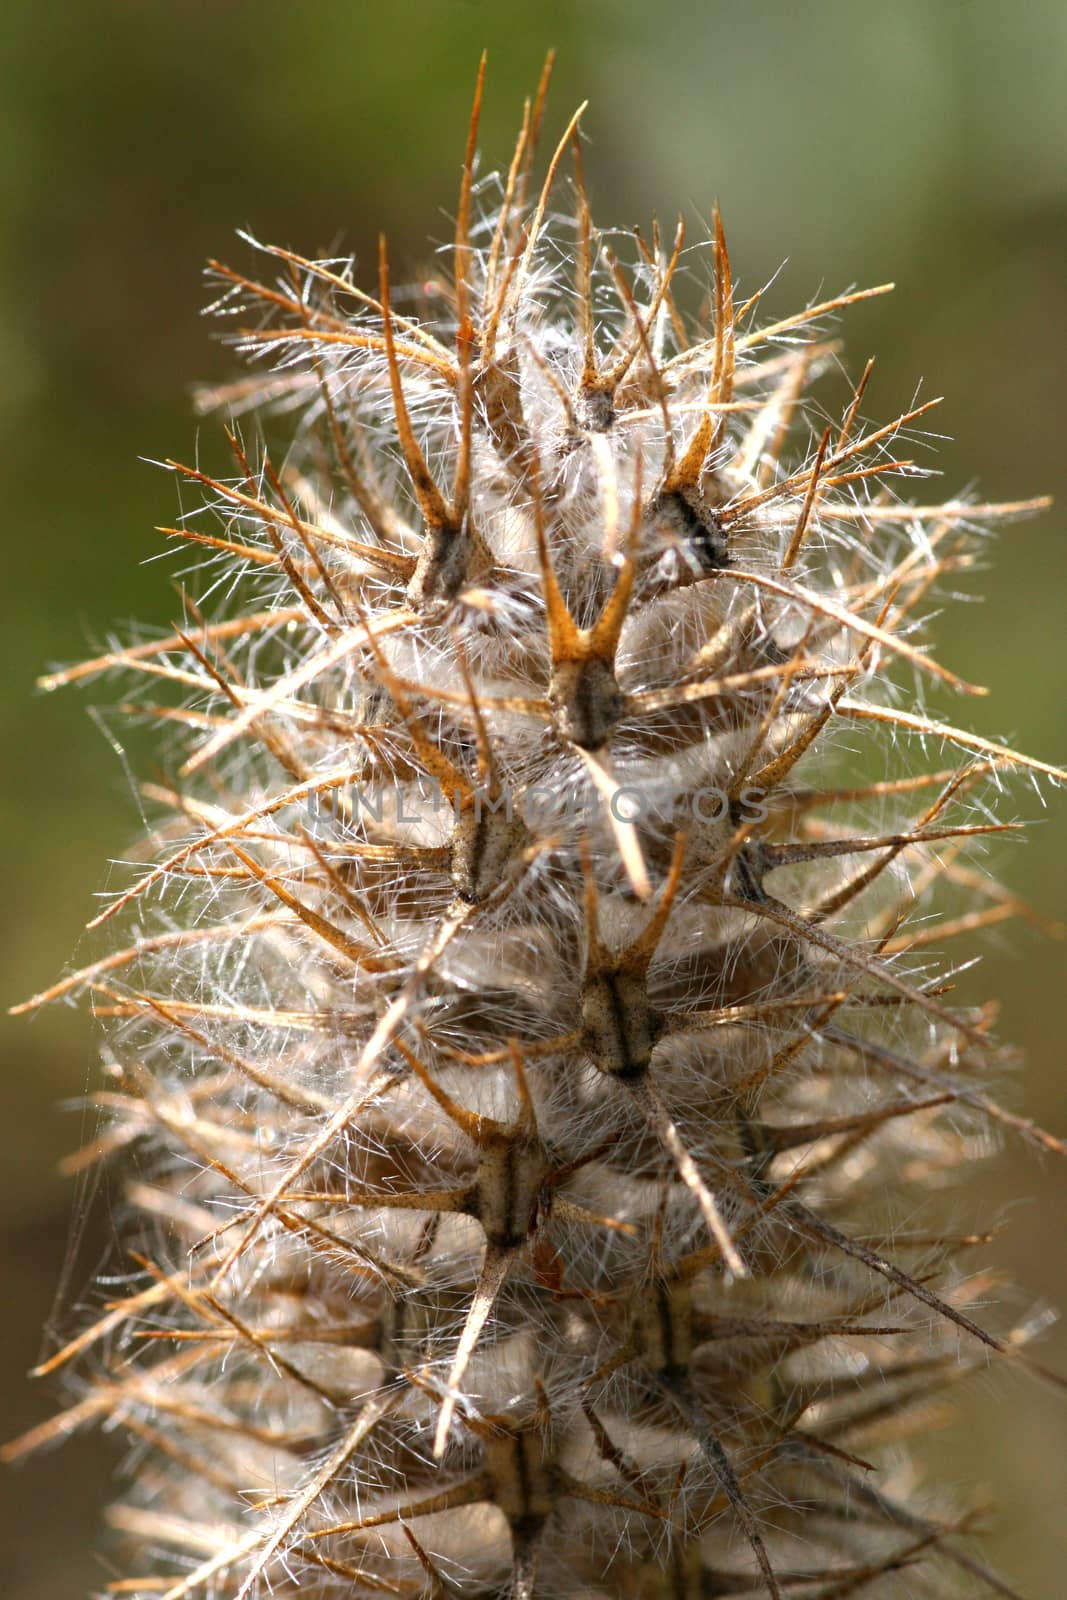 Prickly inflorescence in summer time